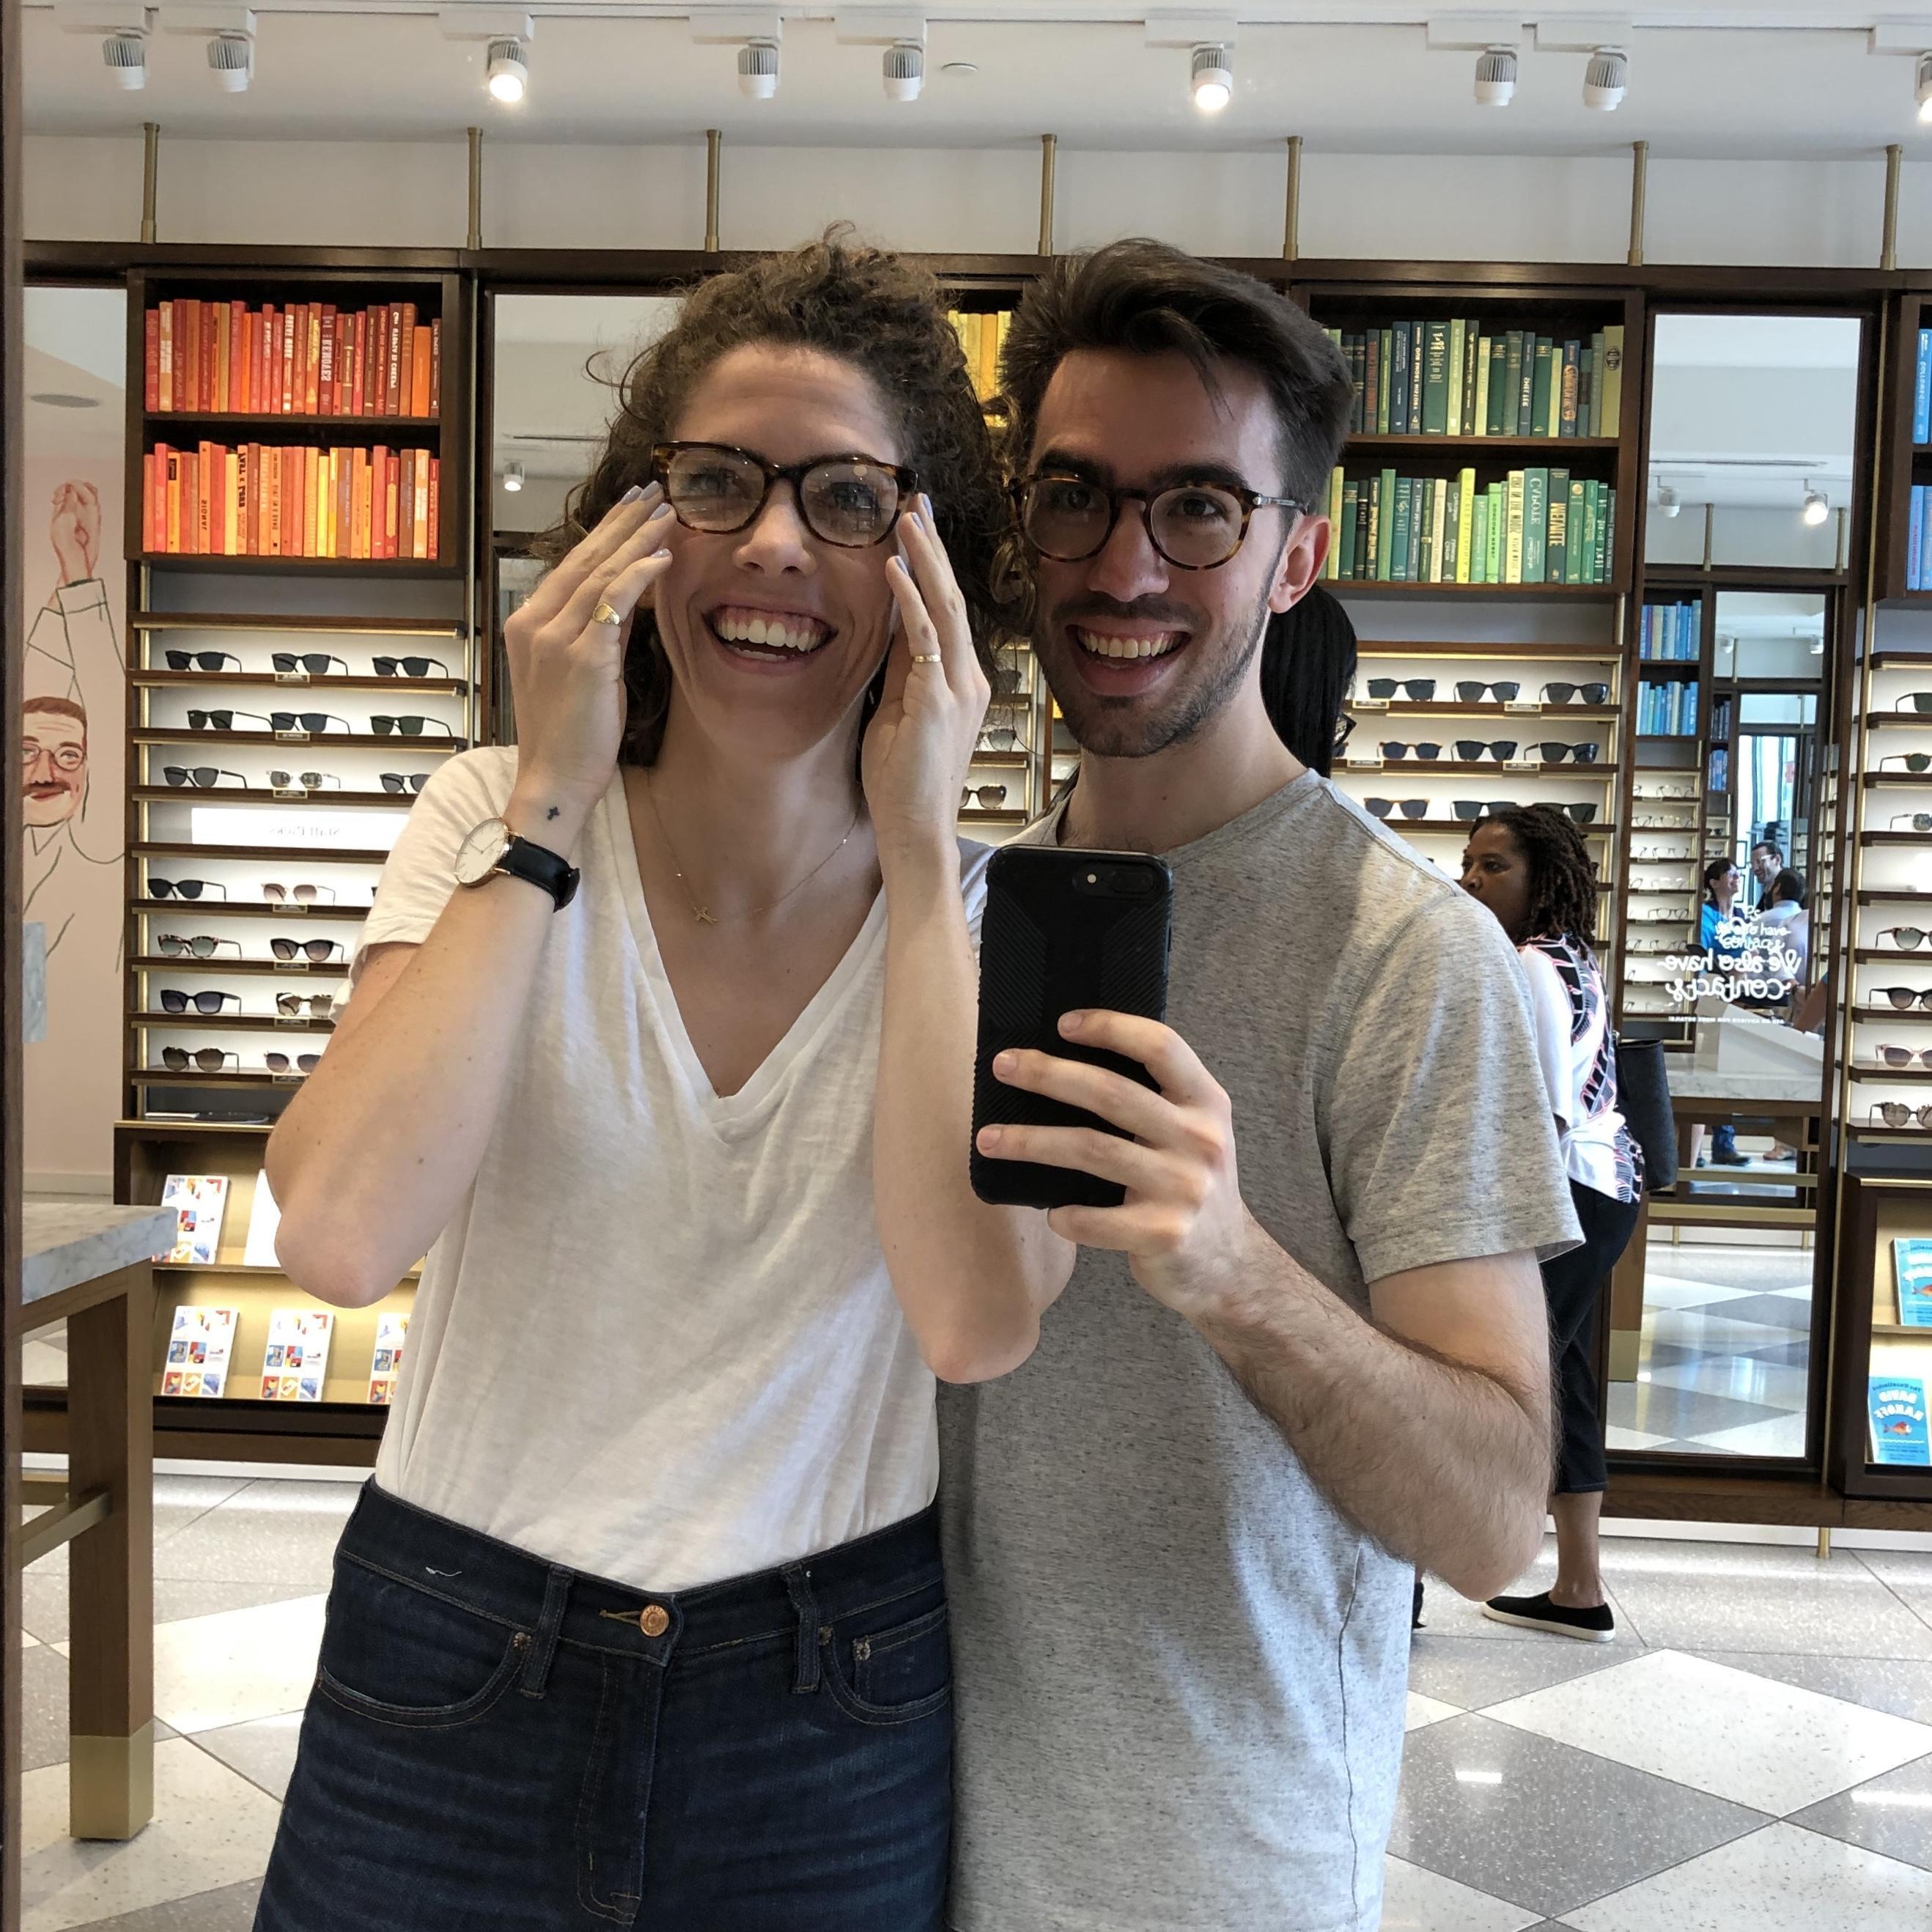 Is it really a visit to Warby Parker without a mirror selfie?